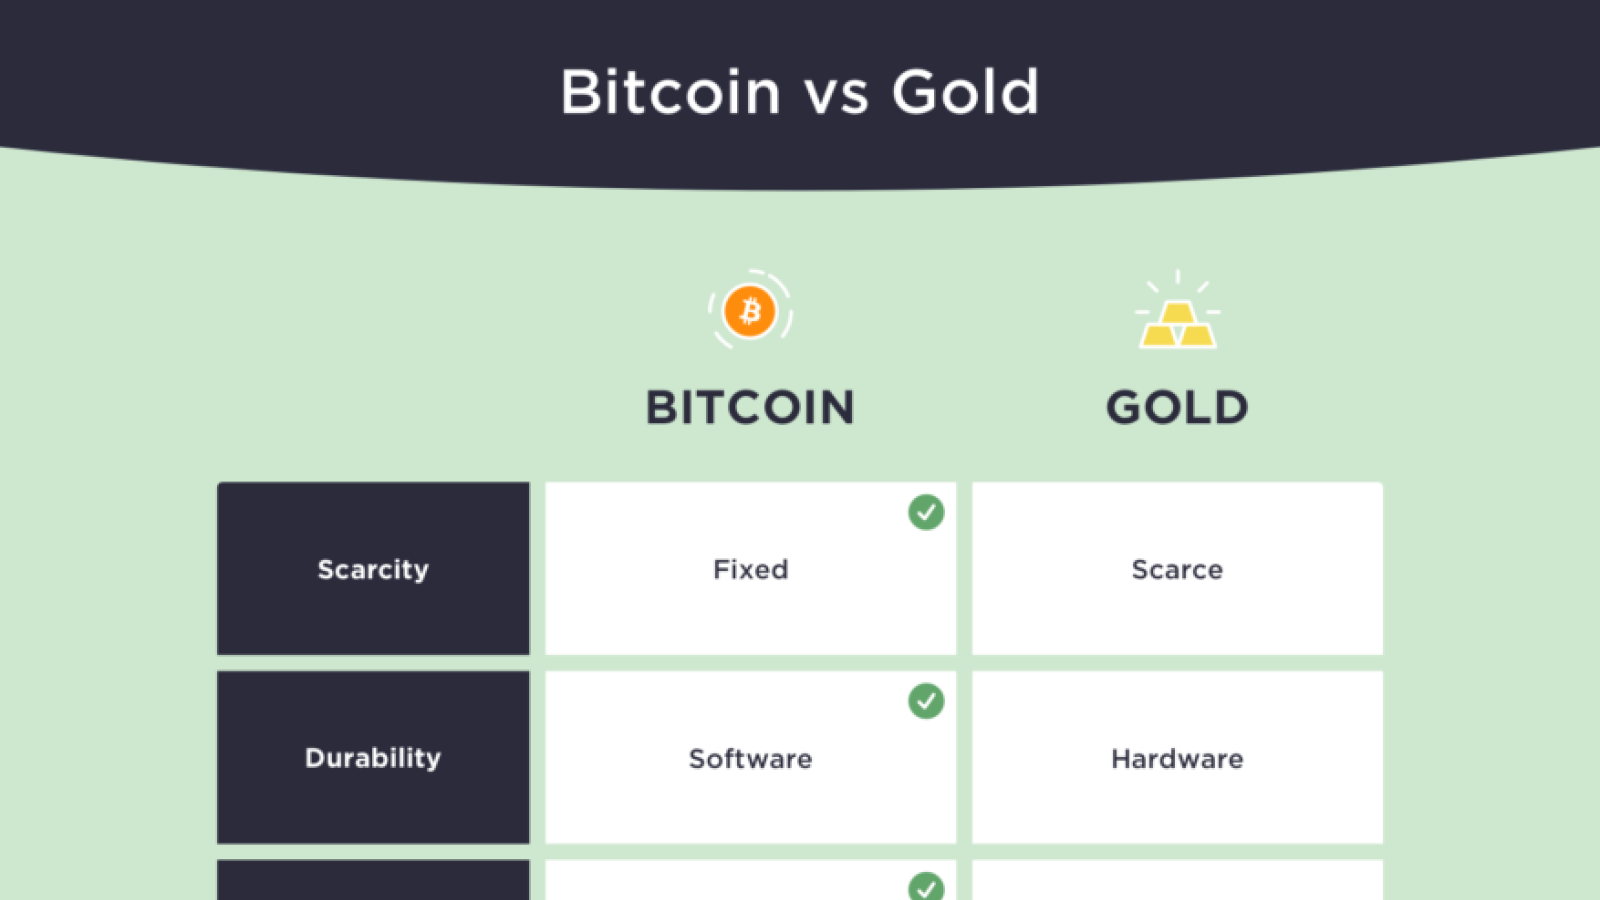 The difference between Bitcoin and gold